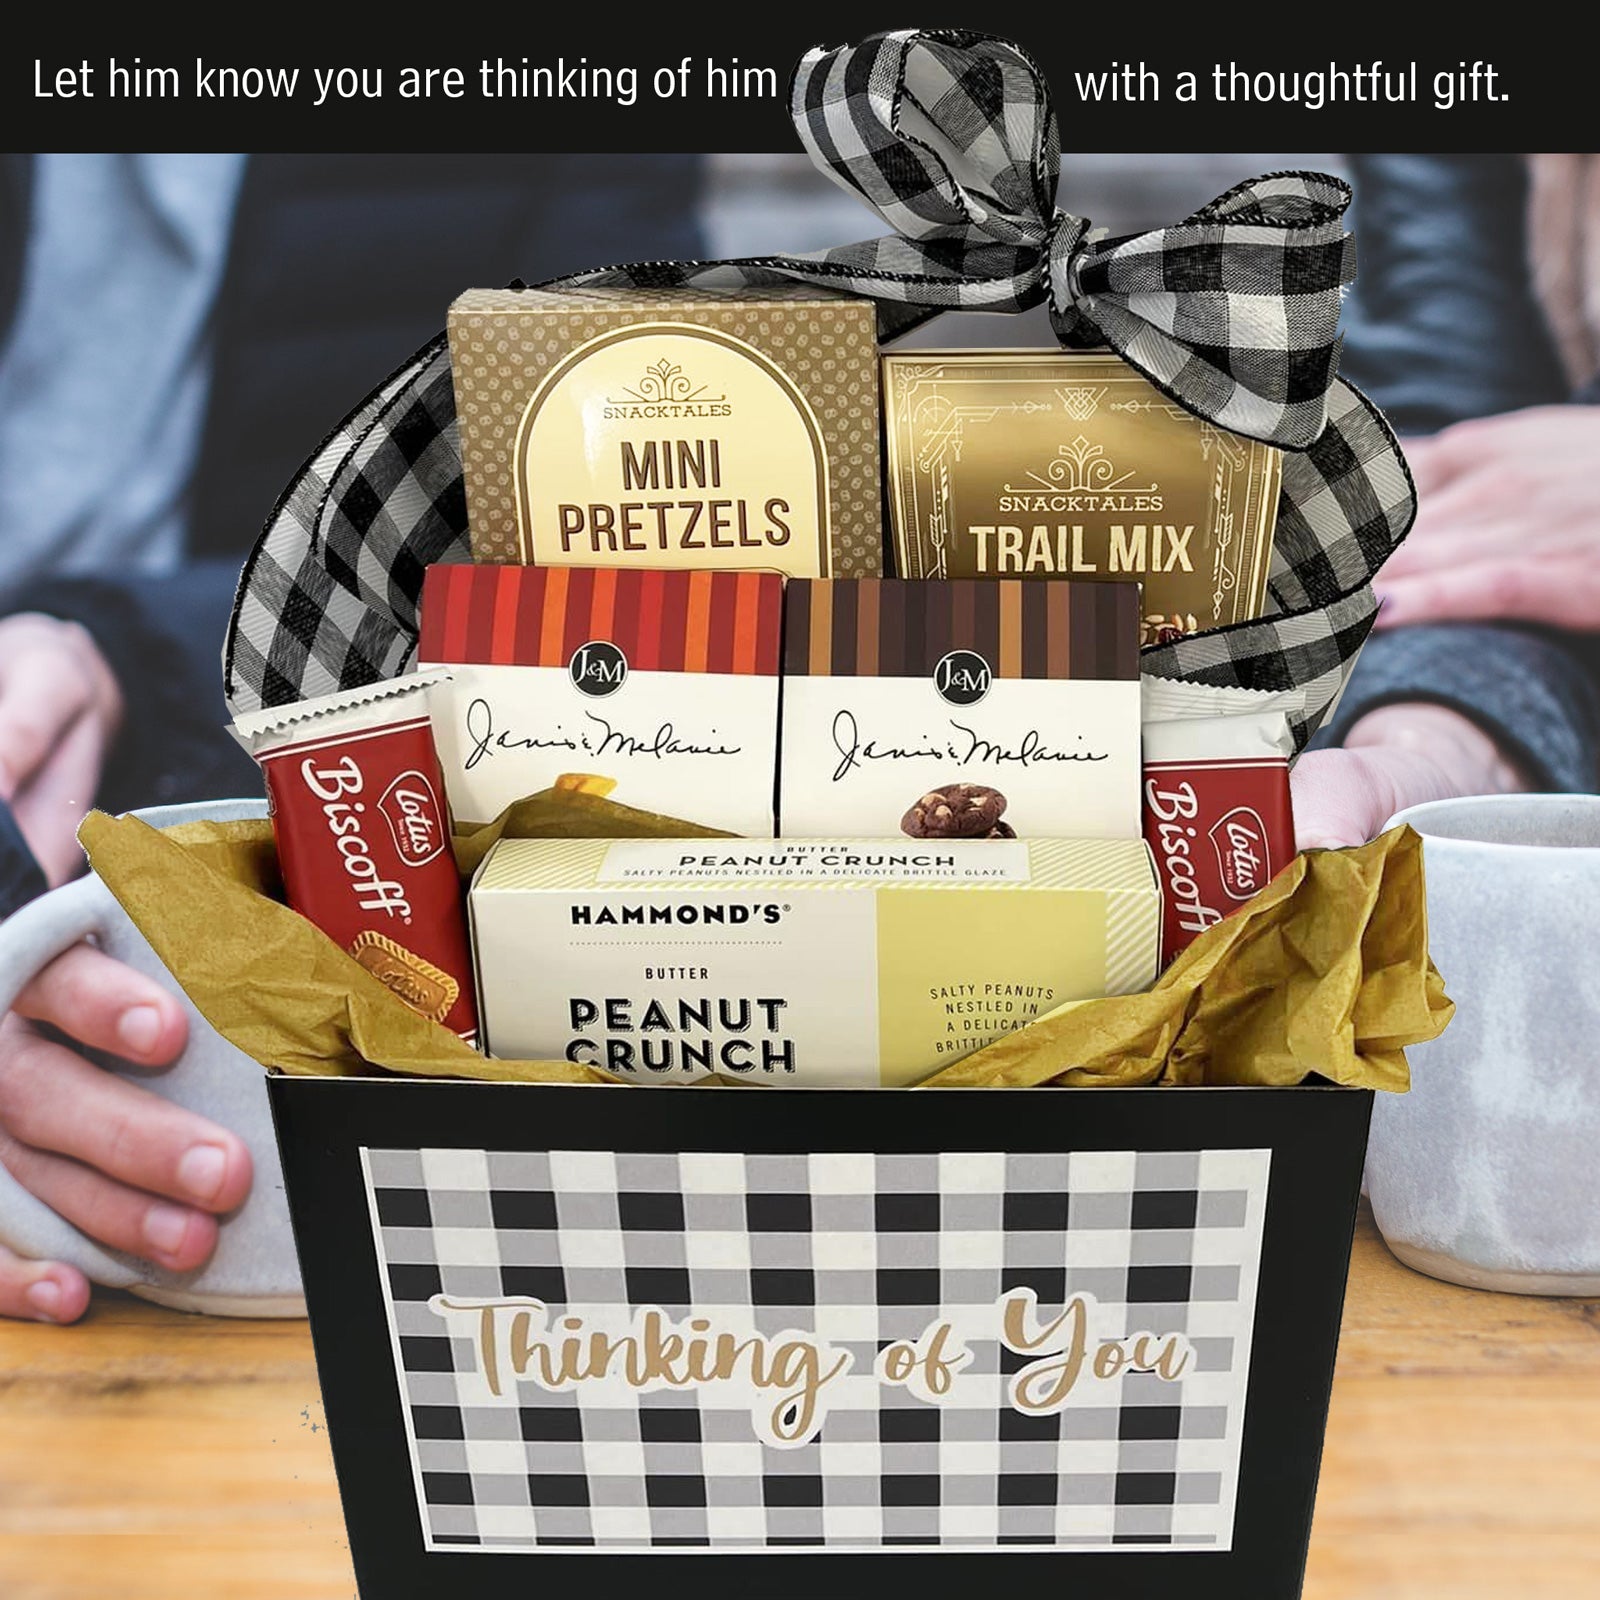 Pin by Lilsdavies on Dads birthday present x | Gift baskets for him,  Fitness gifts for men, Cute valentines day gifts